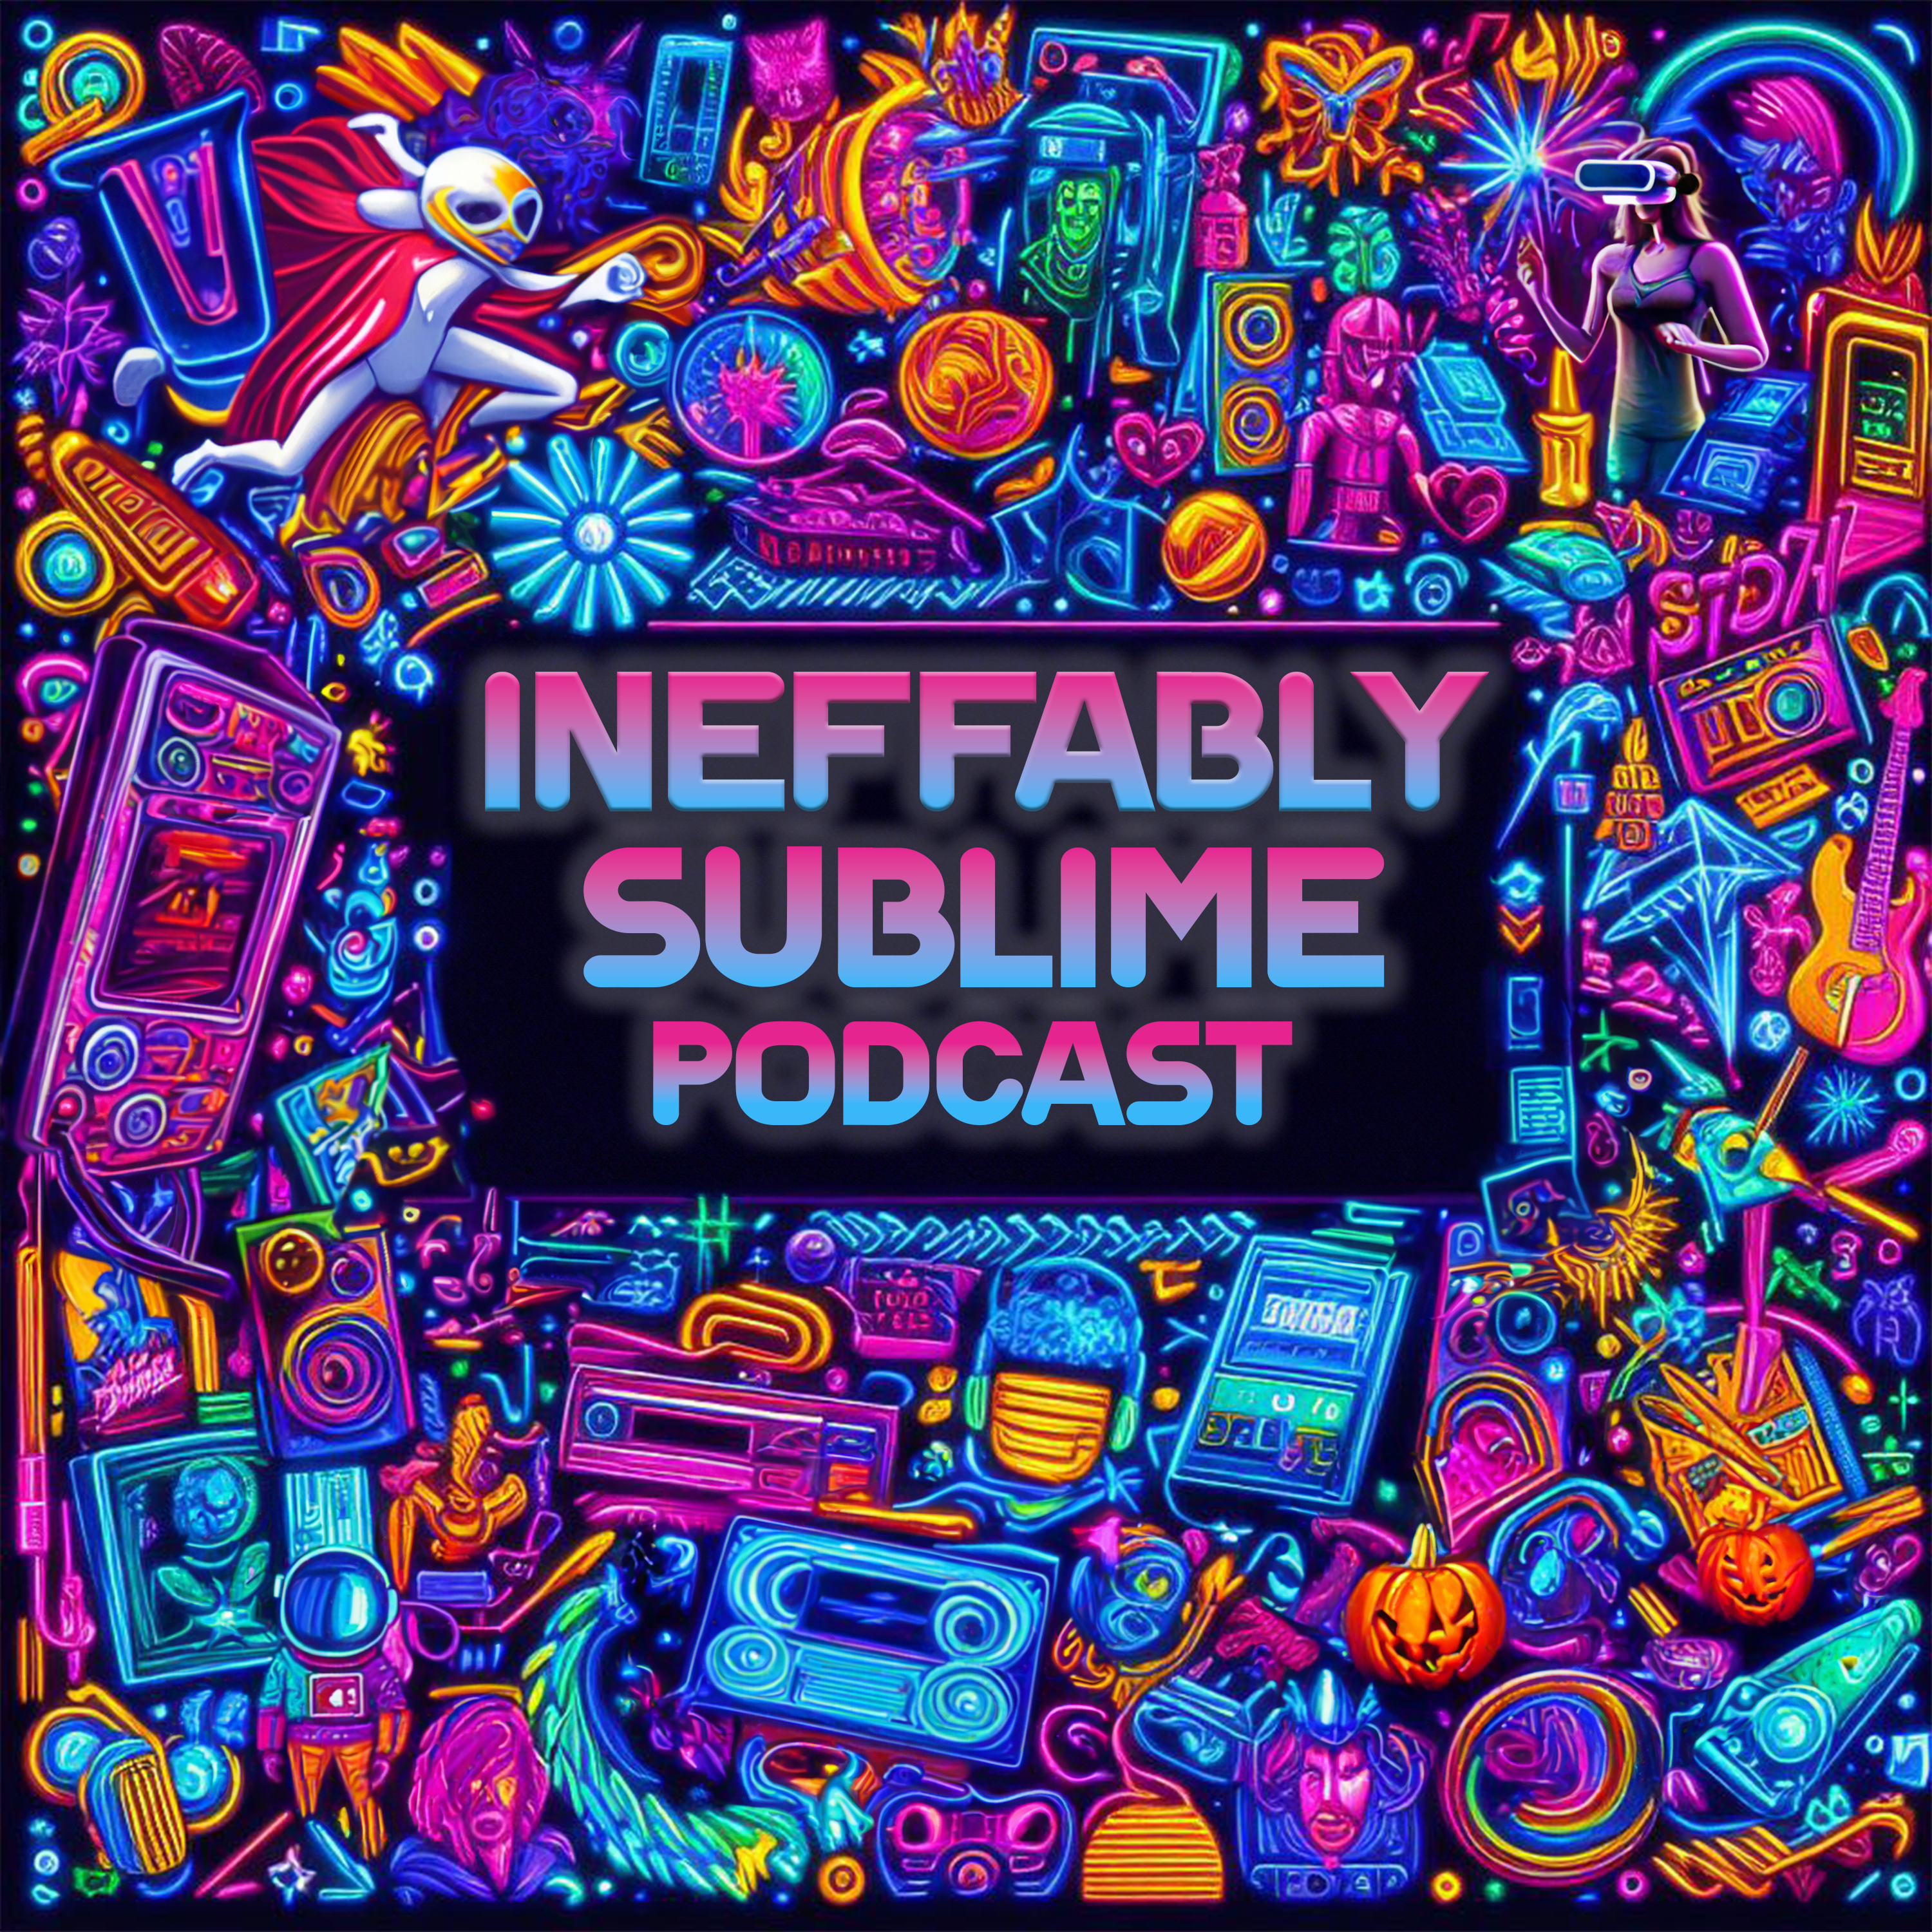 Ineffably Sublime Podcast